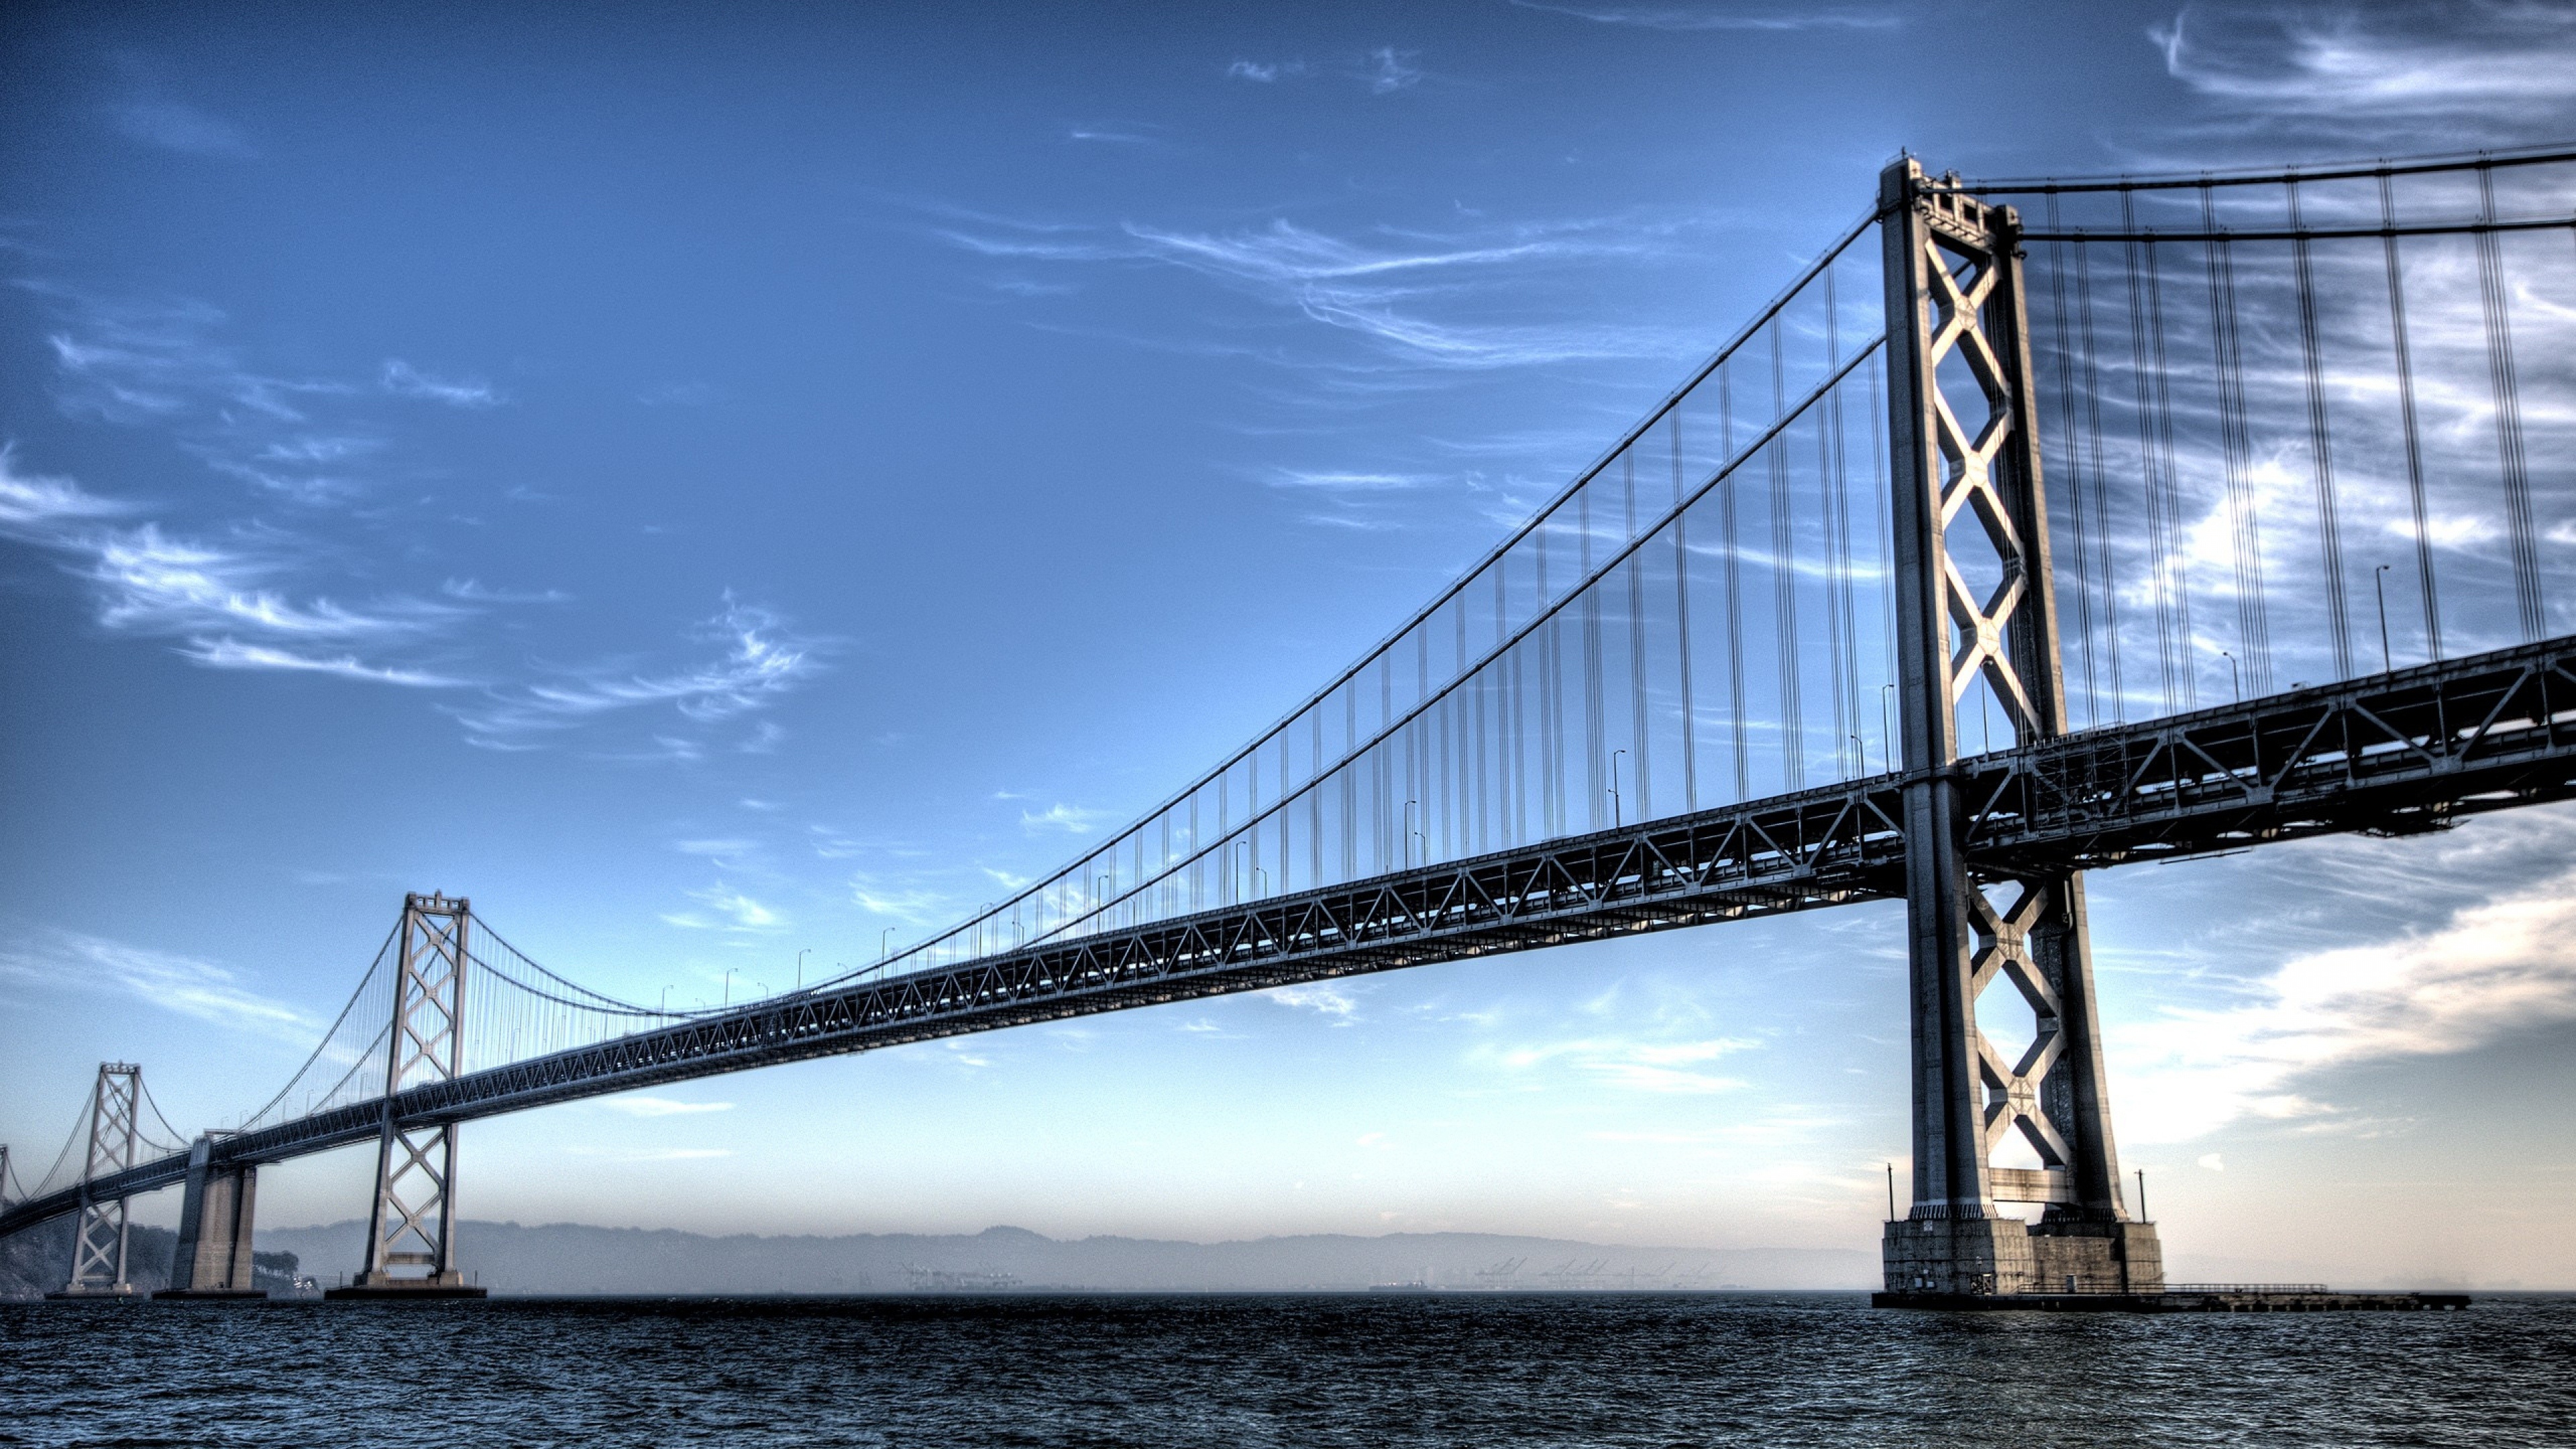 Bridge: The San Francisco-Oakland Bay span, One of the longest spans in the United States. 3840x2160 4K Background.